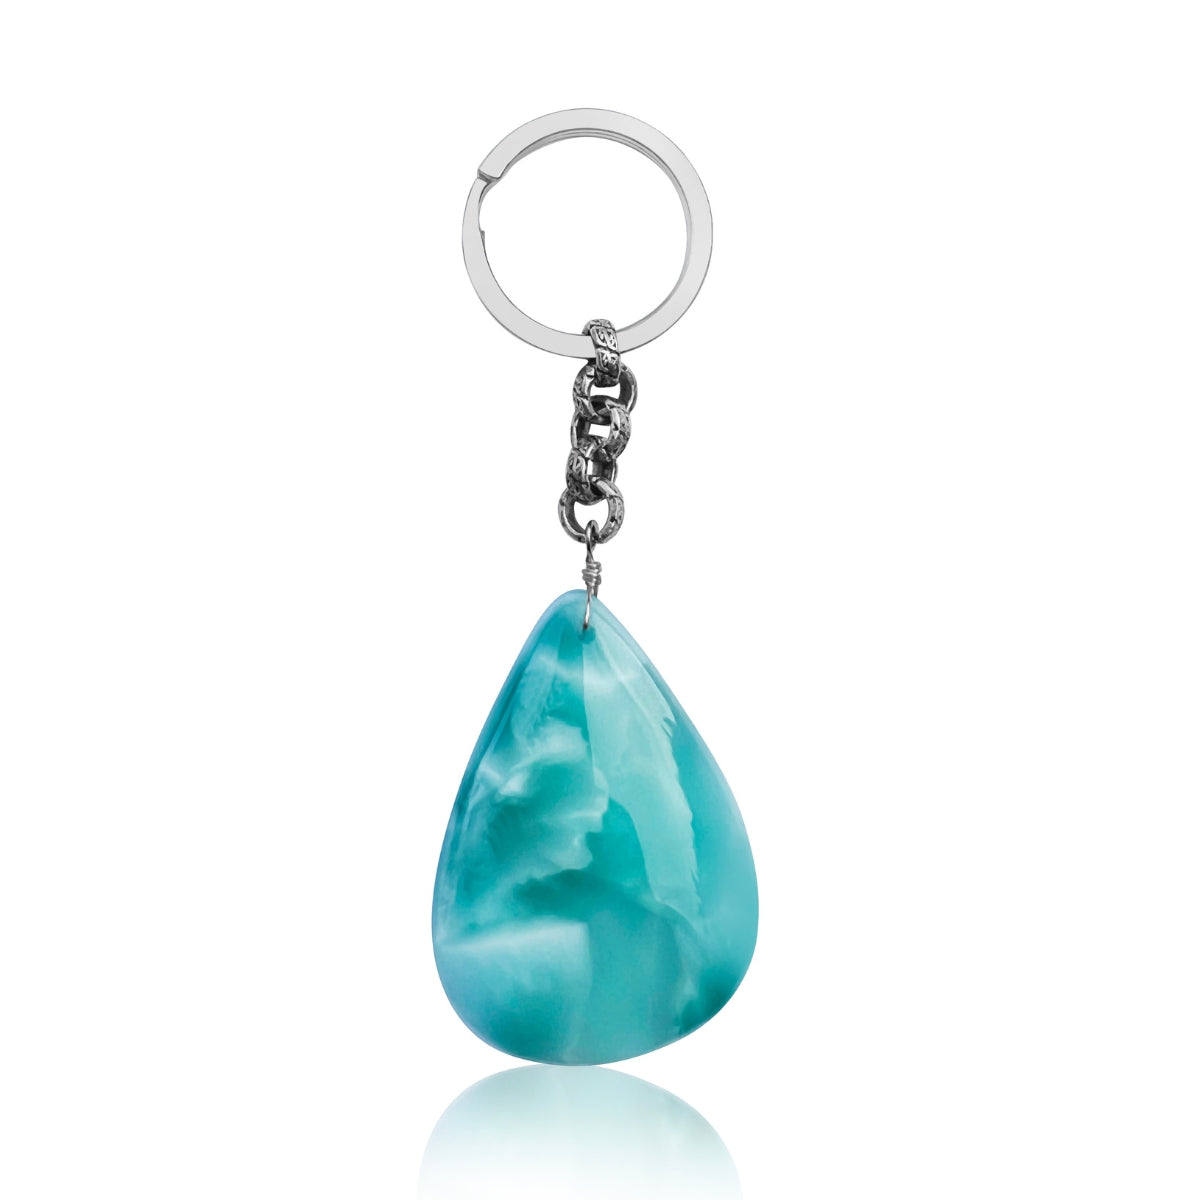 Devine Feminine Green Moonstone Keychain. "You don't have to play masculine to be a strong woman," Mary Elizabeth Winstead The Divine Feminine lives within you, within me, within us all. The Divine Feminine is an energy, which means she can’t be seen or heard, but she can be felt.